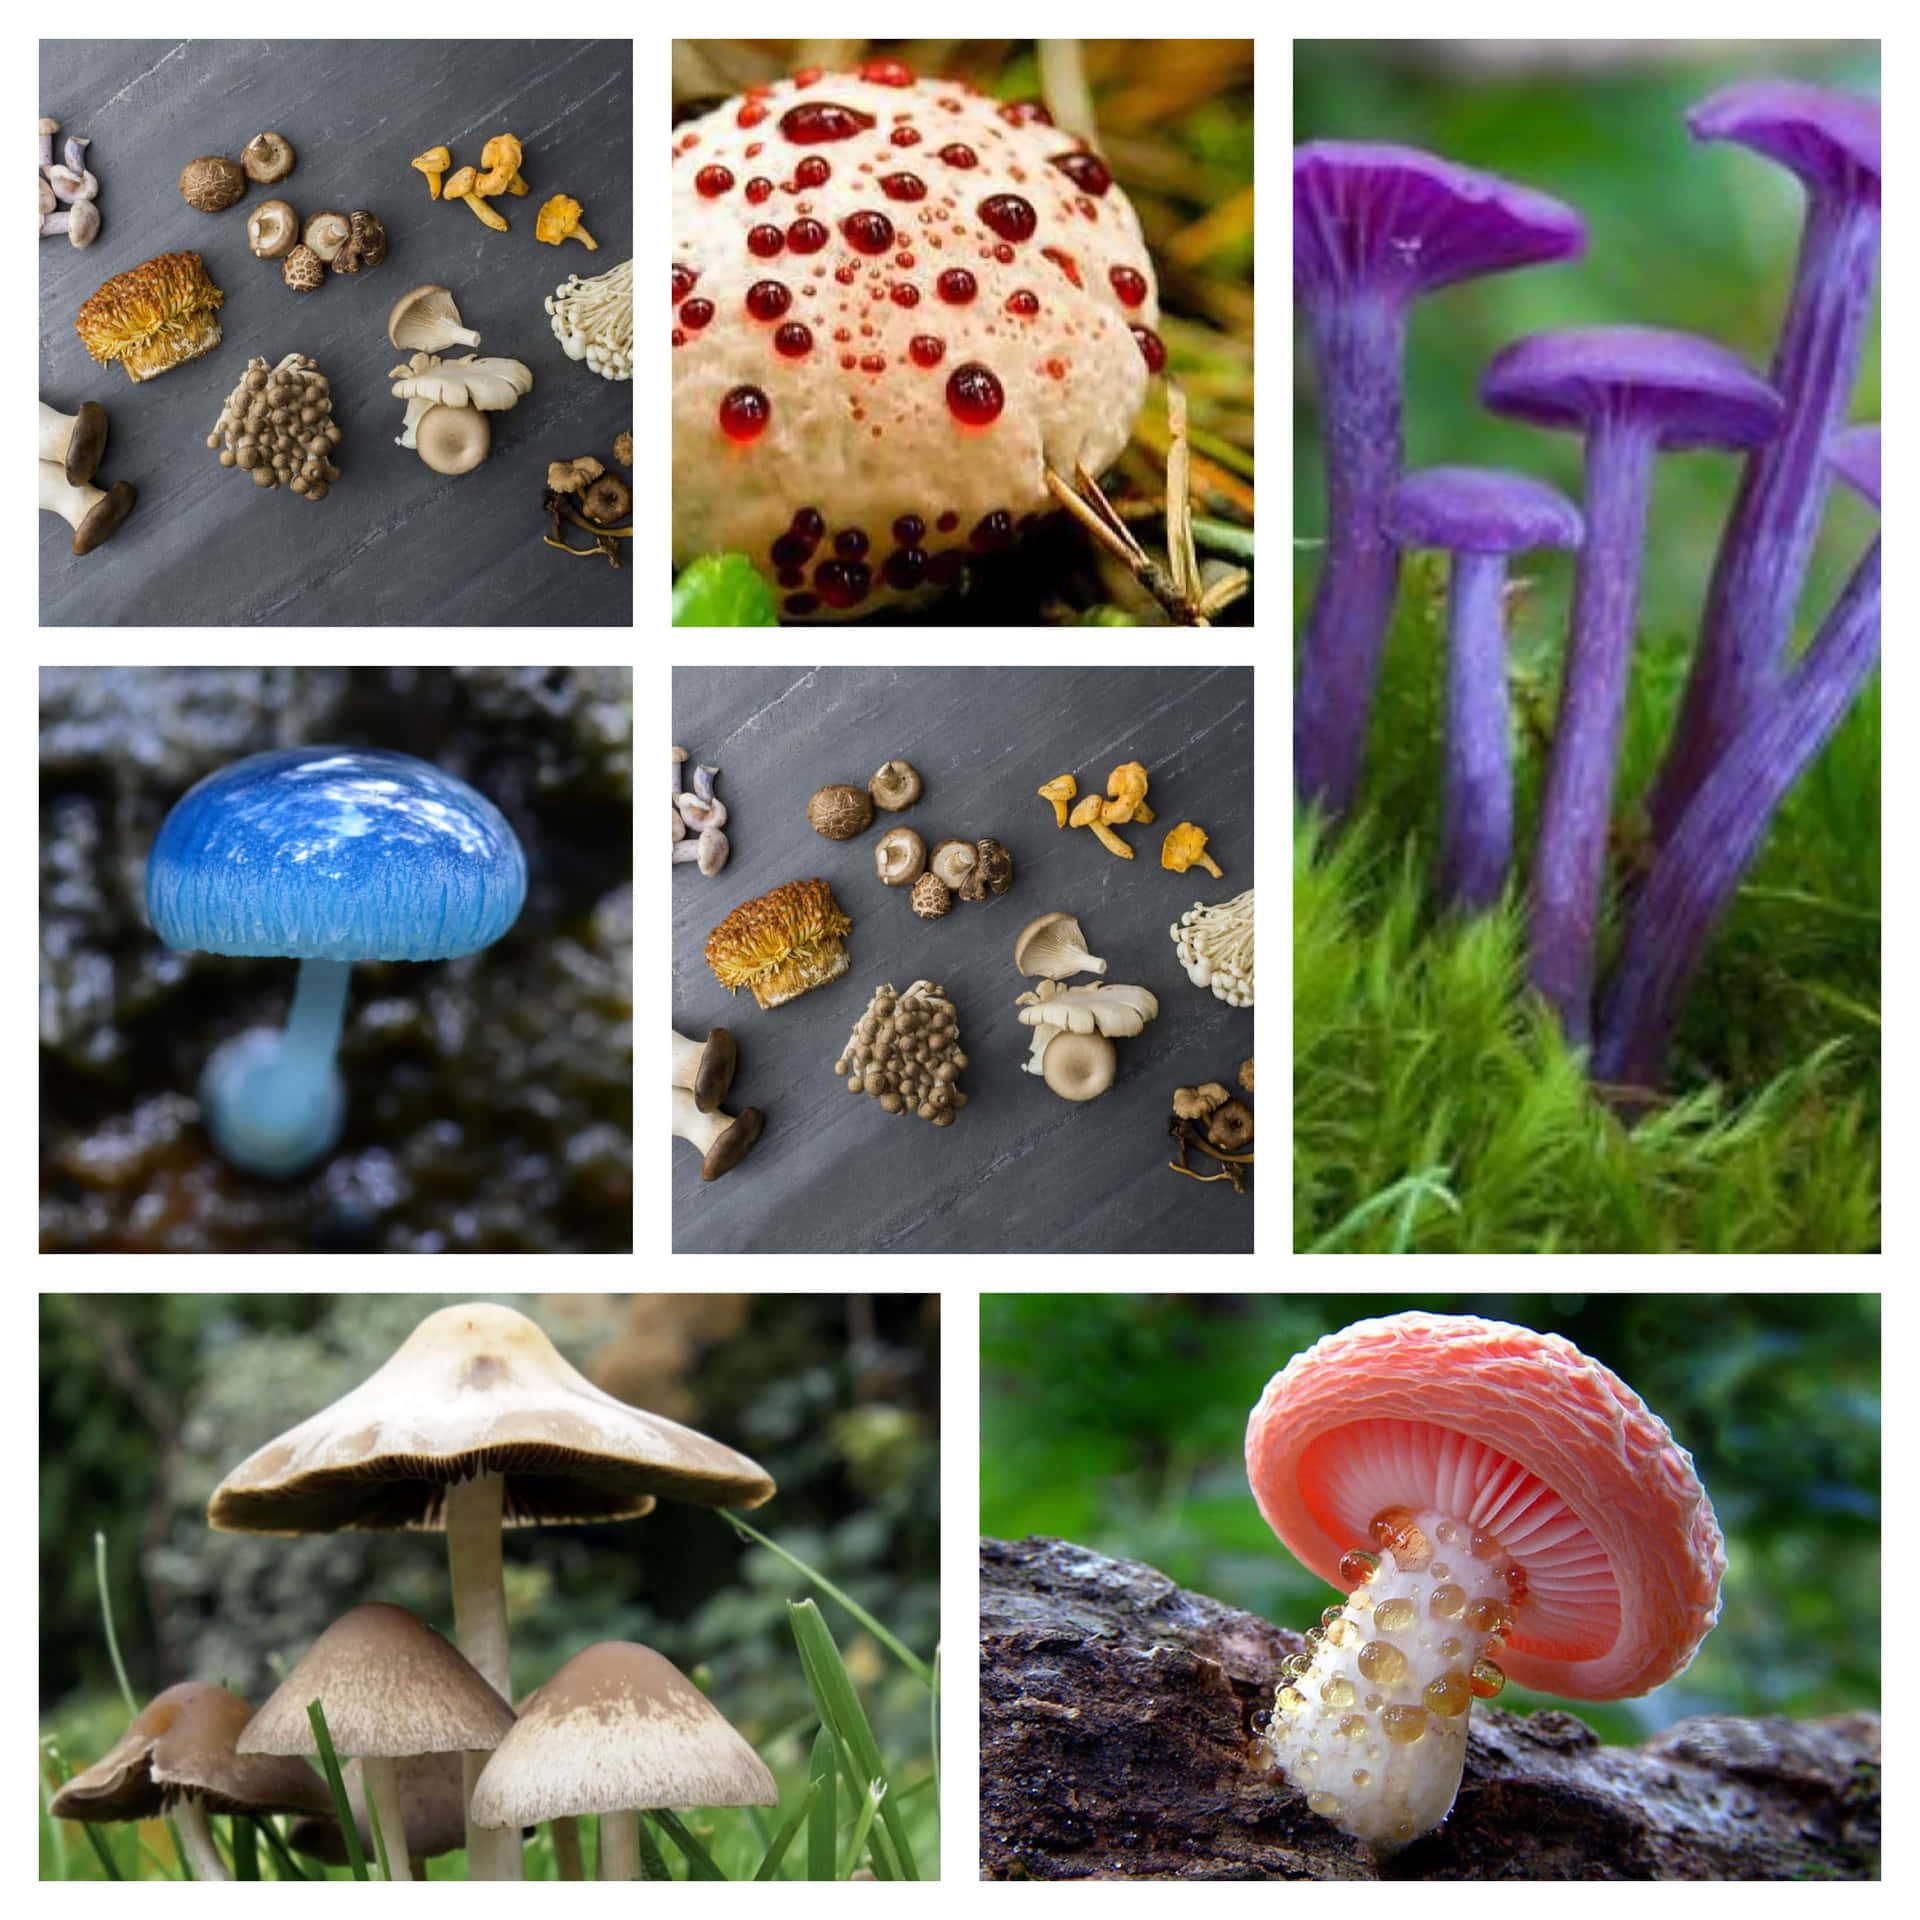 A Collage Of Pictures Of Different Mushrooms